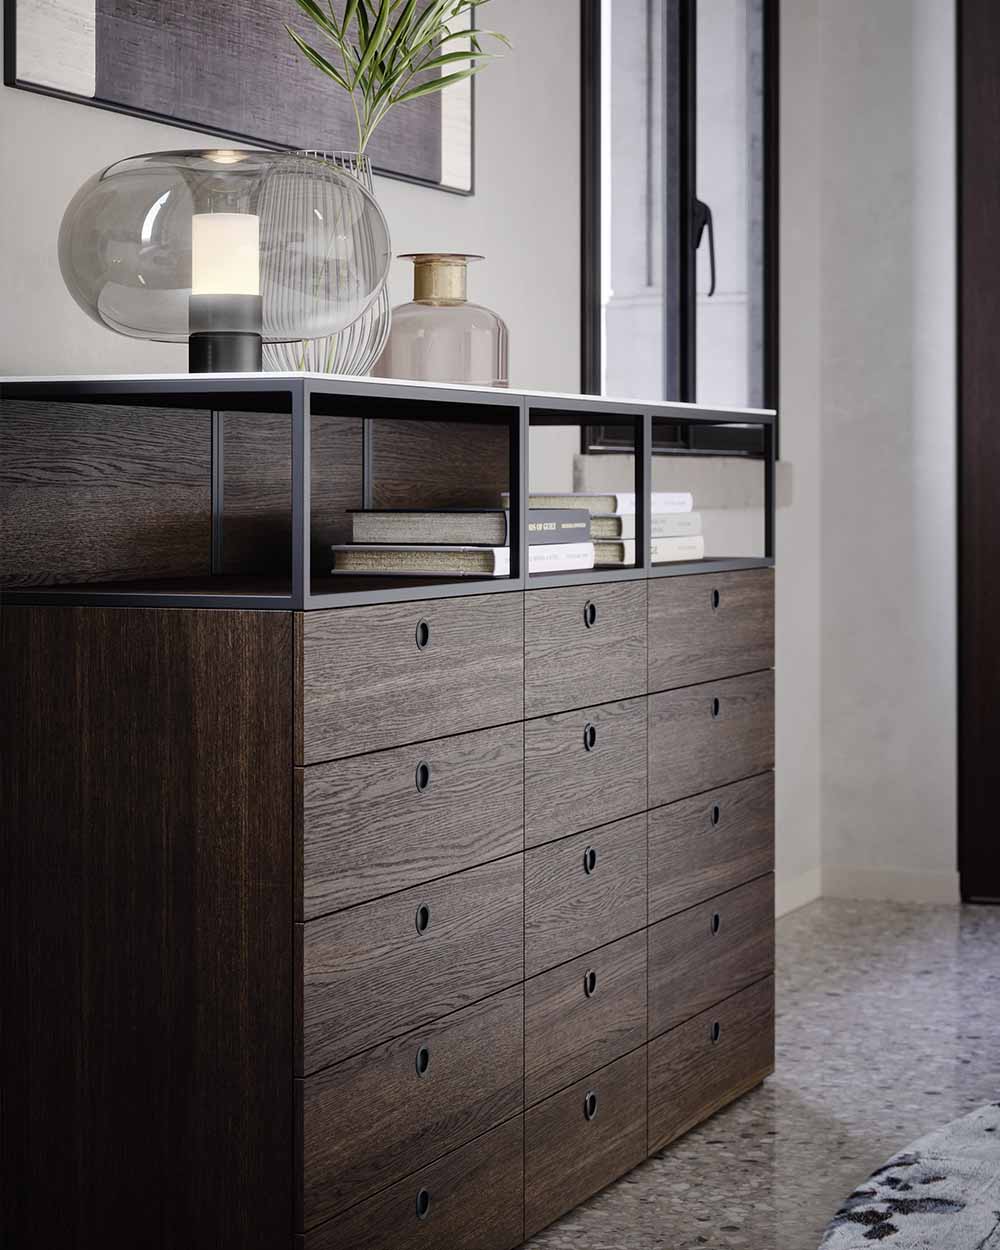 Square luxury Italian bedside table and drawer unit by Novamobili. Sold by Krieder UK.